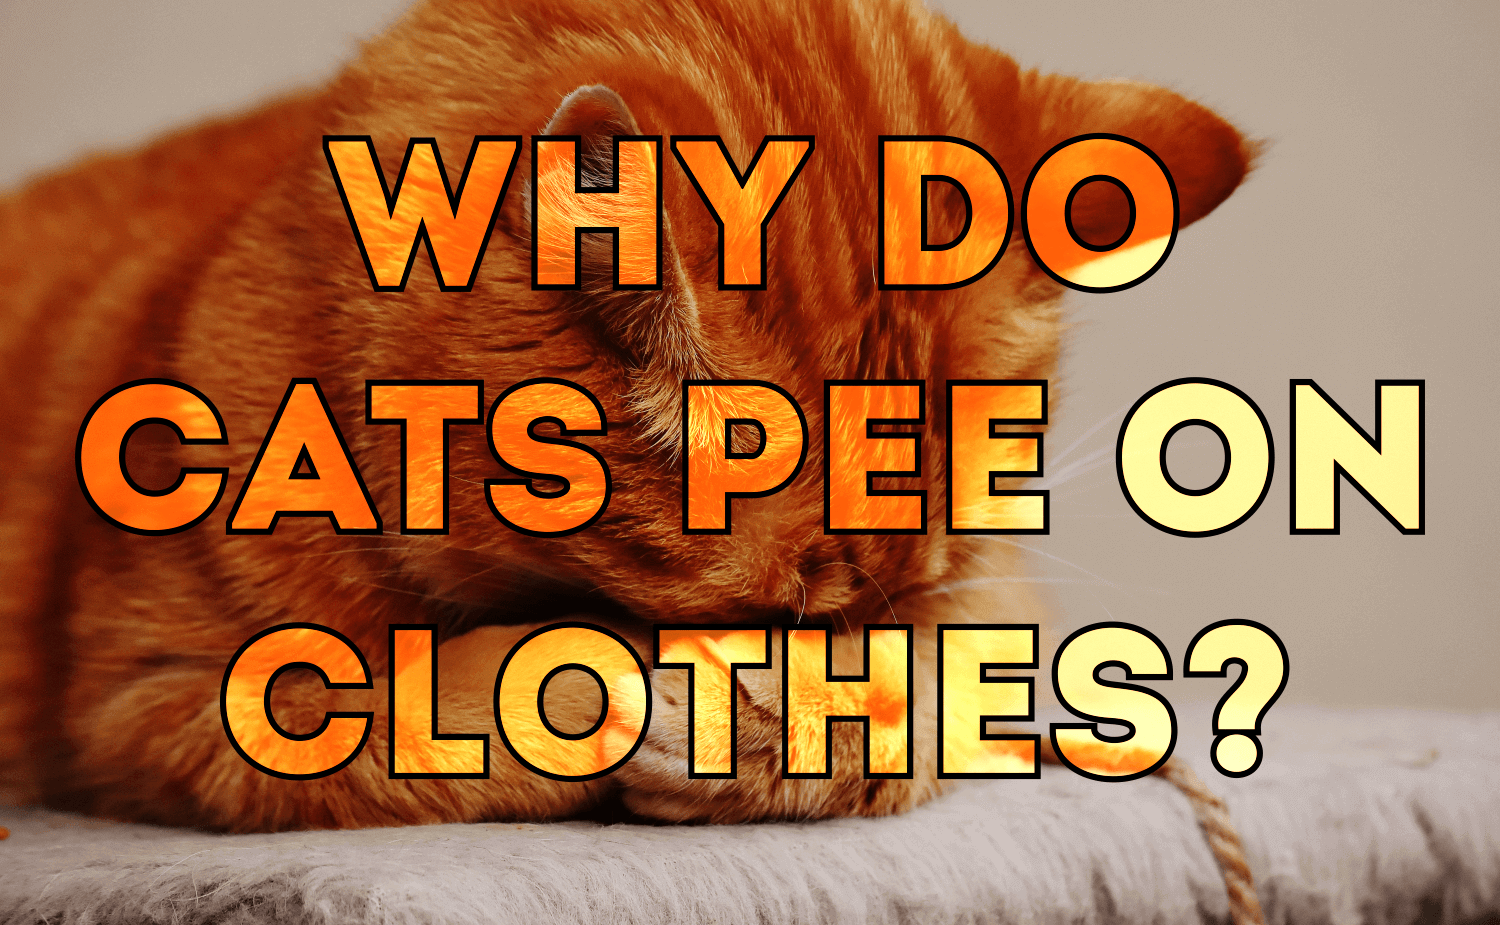 My Cat Keeps Peeing on My Clothes